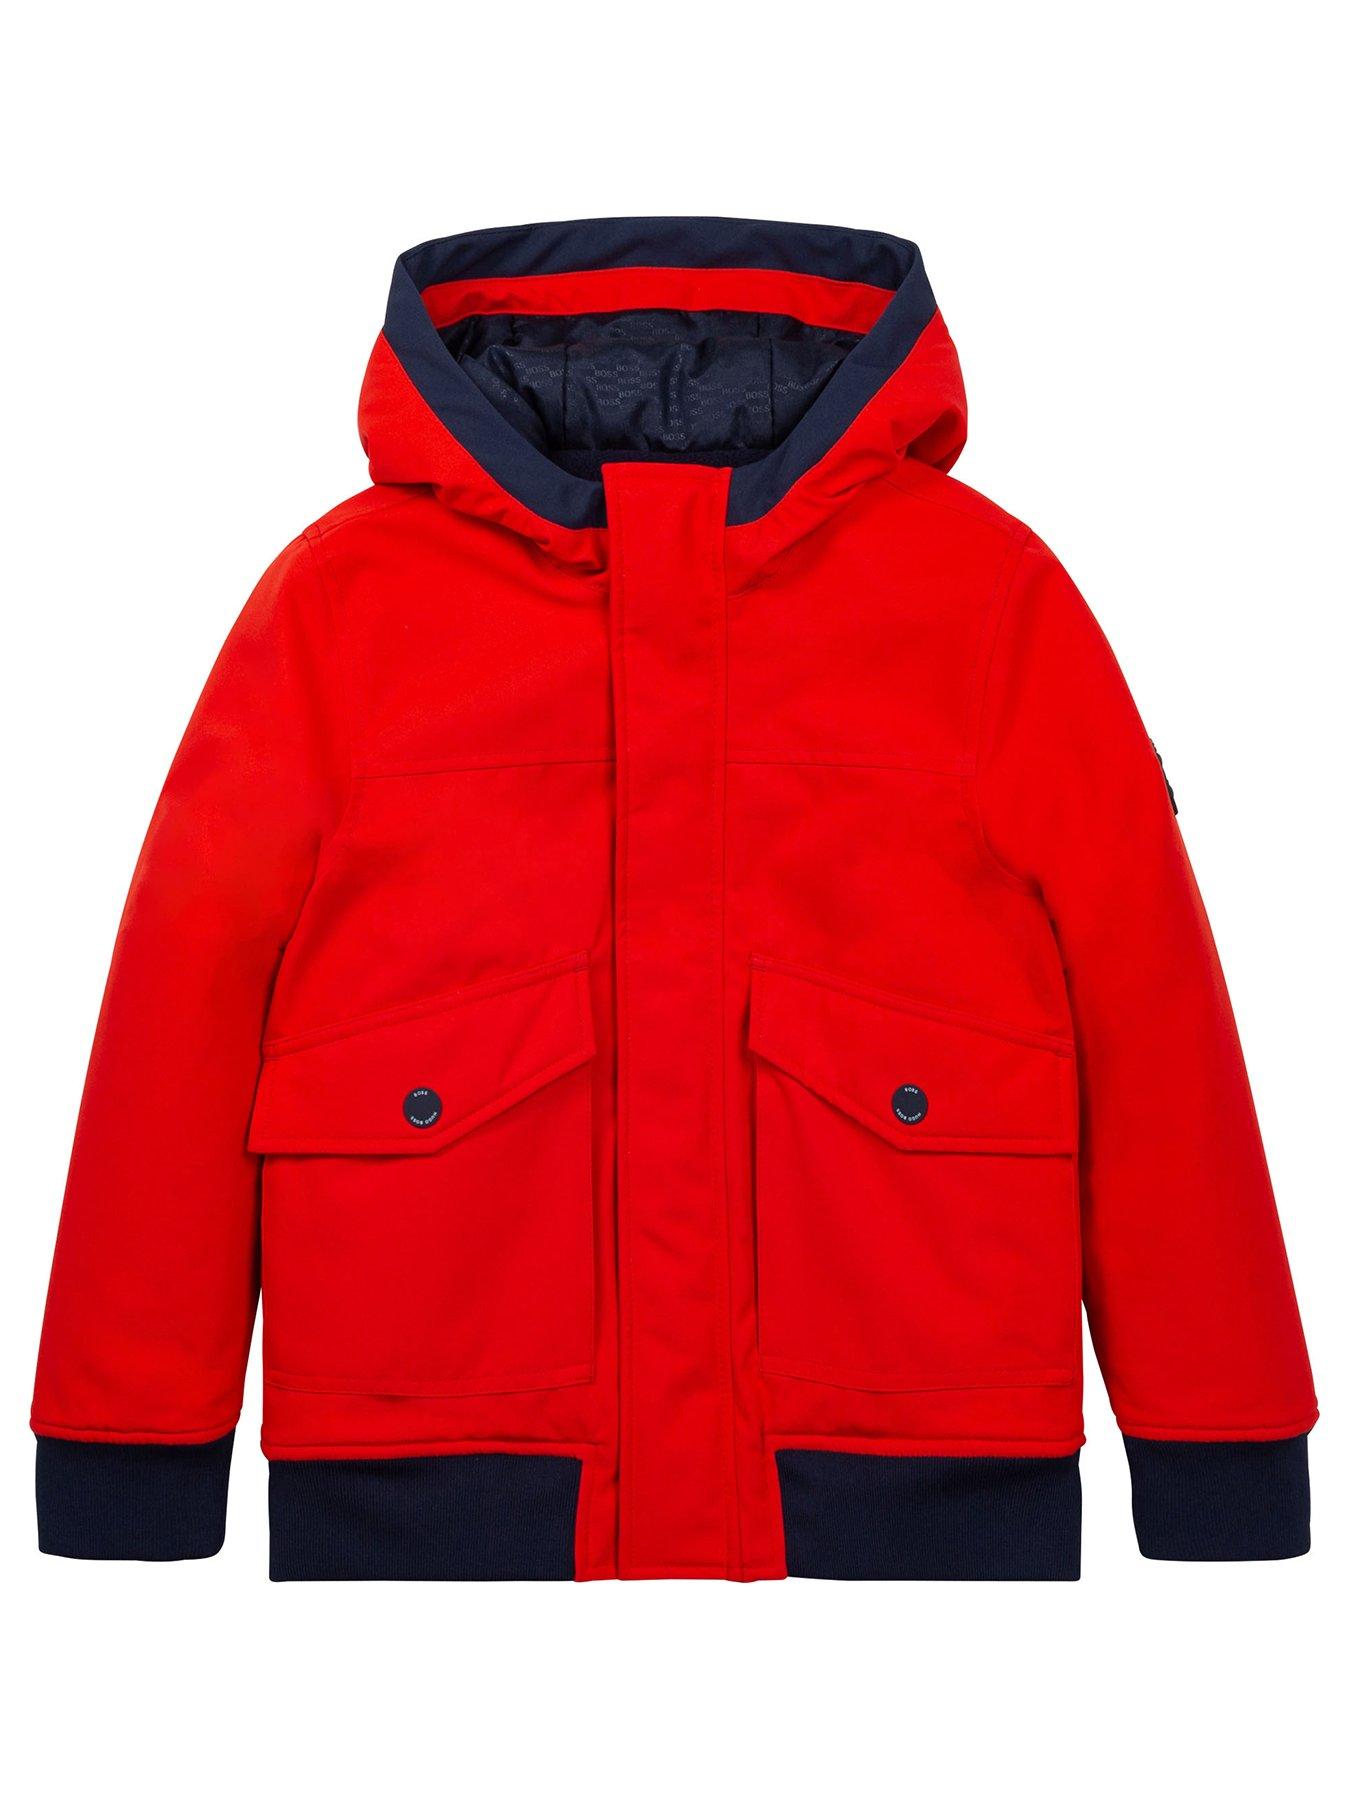 Boys Clothes Boys Hooded Parka - Red